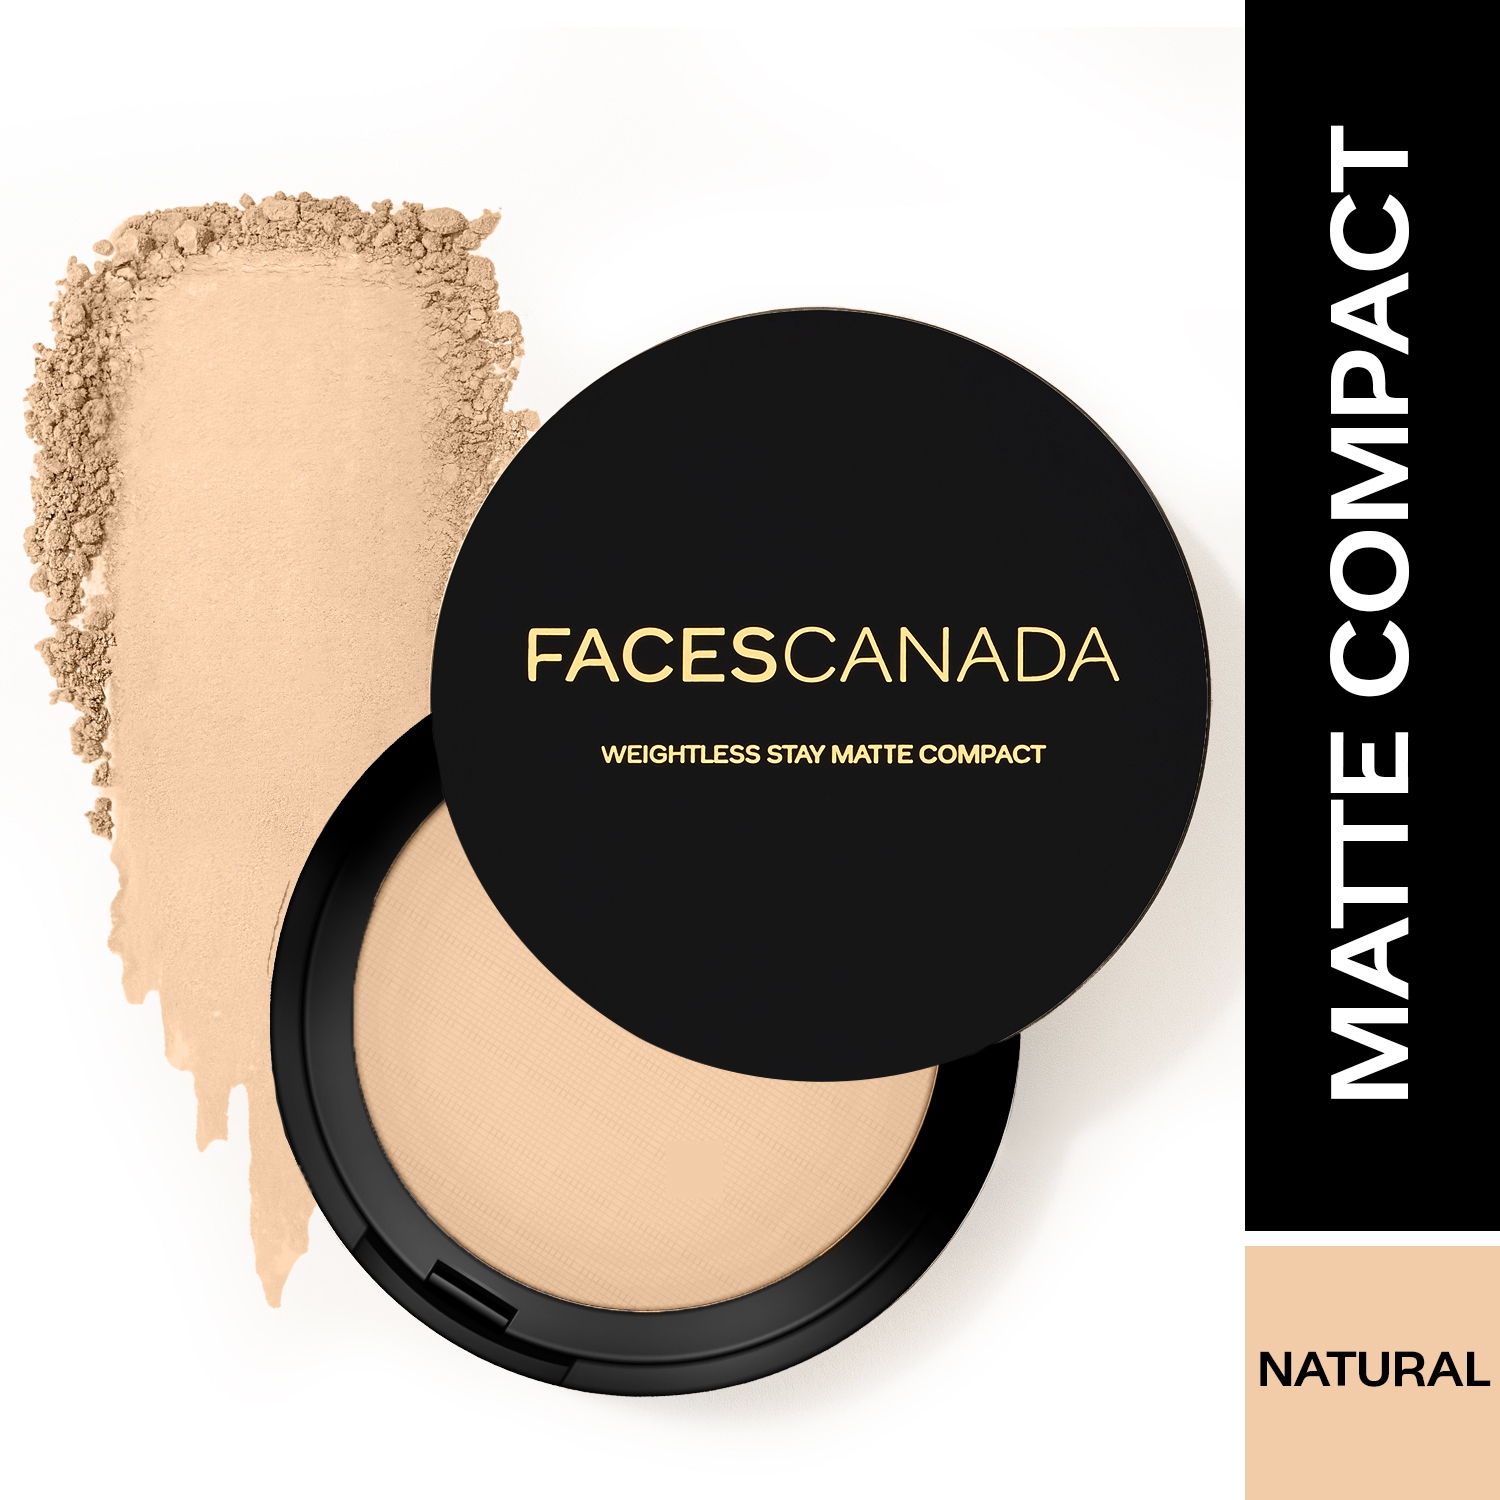 Faces Canada | Faces Canada Weightless Stay Matte Compact SPF 20 - 02 Natural (9g)